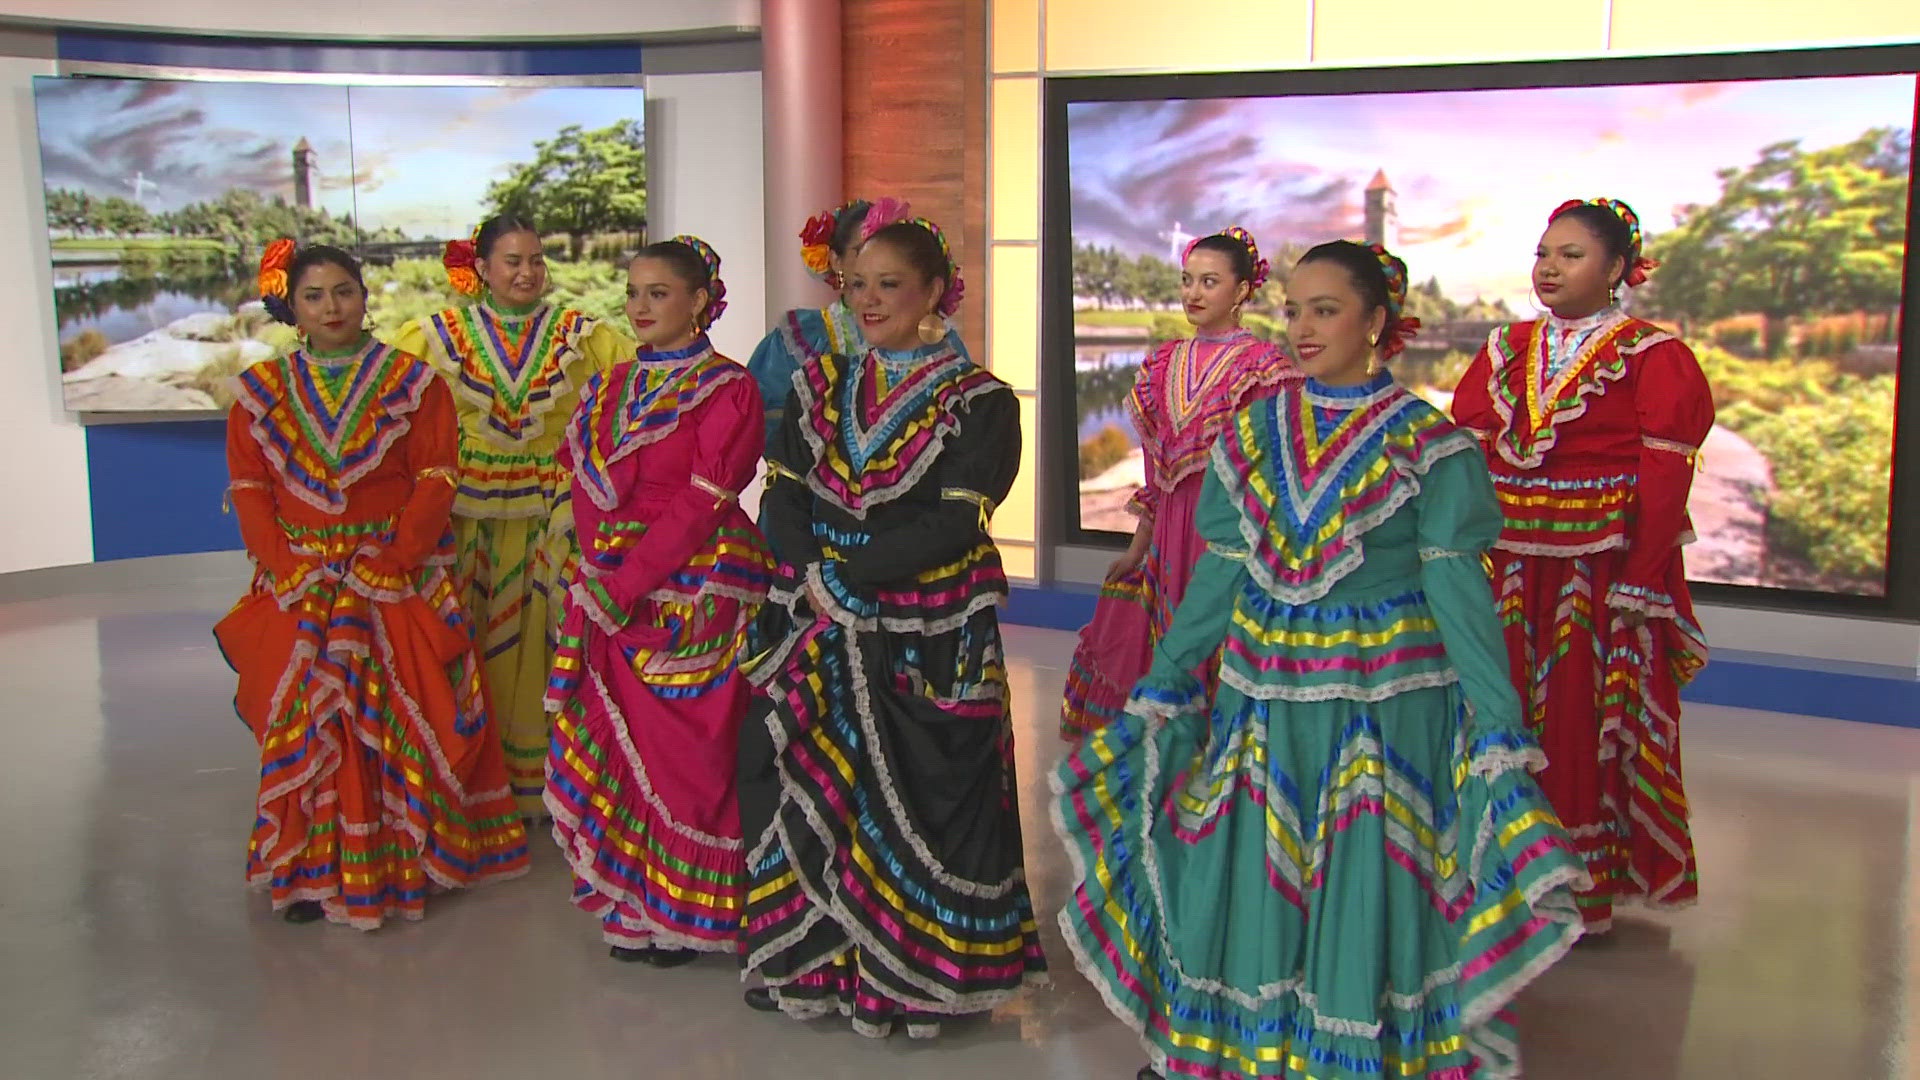 Brianda Liseth Perez and the dancers with Ballet Folklorico de Spokane talked about this weekends events and gave a preview of the dances they will perform.